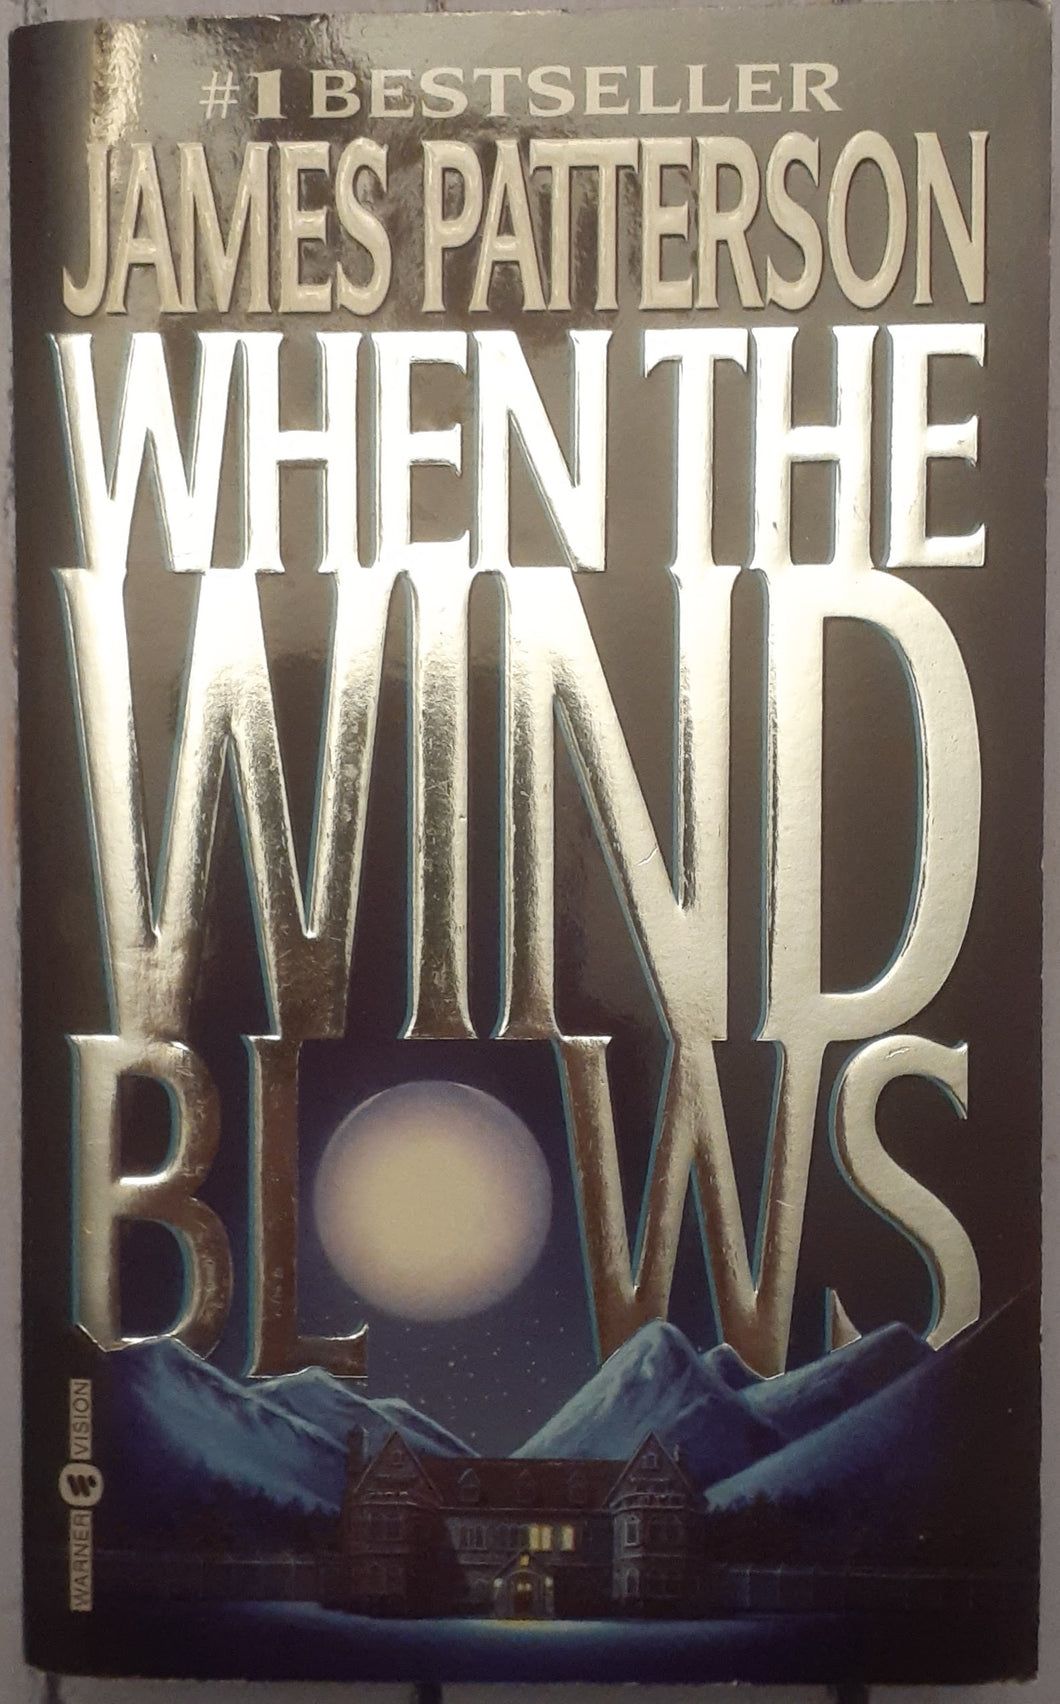 When the Wind Blows